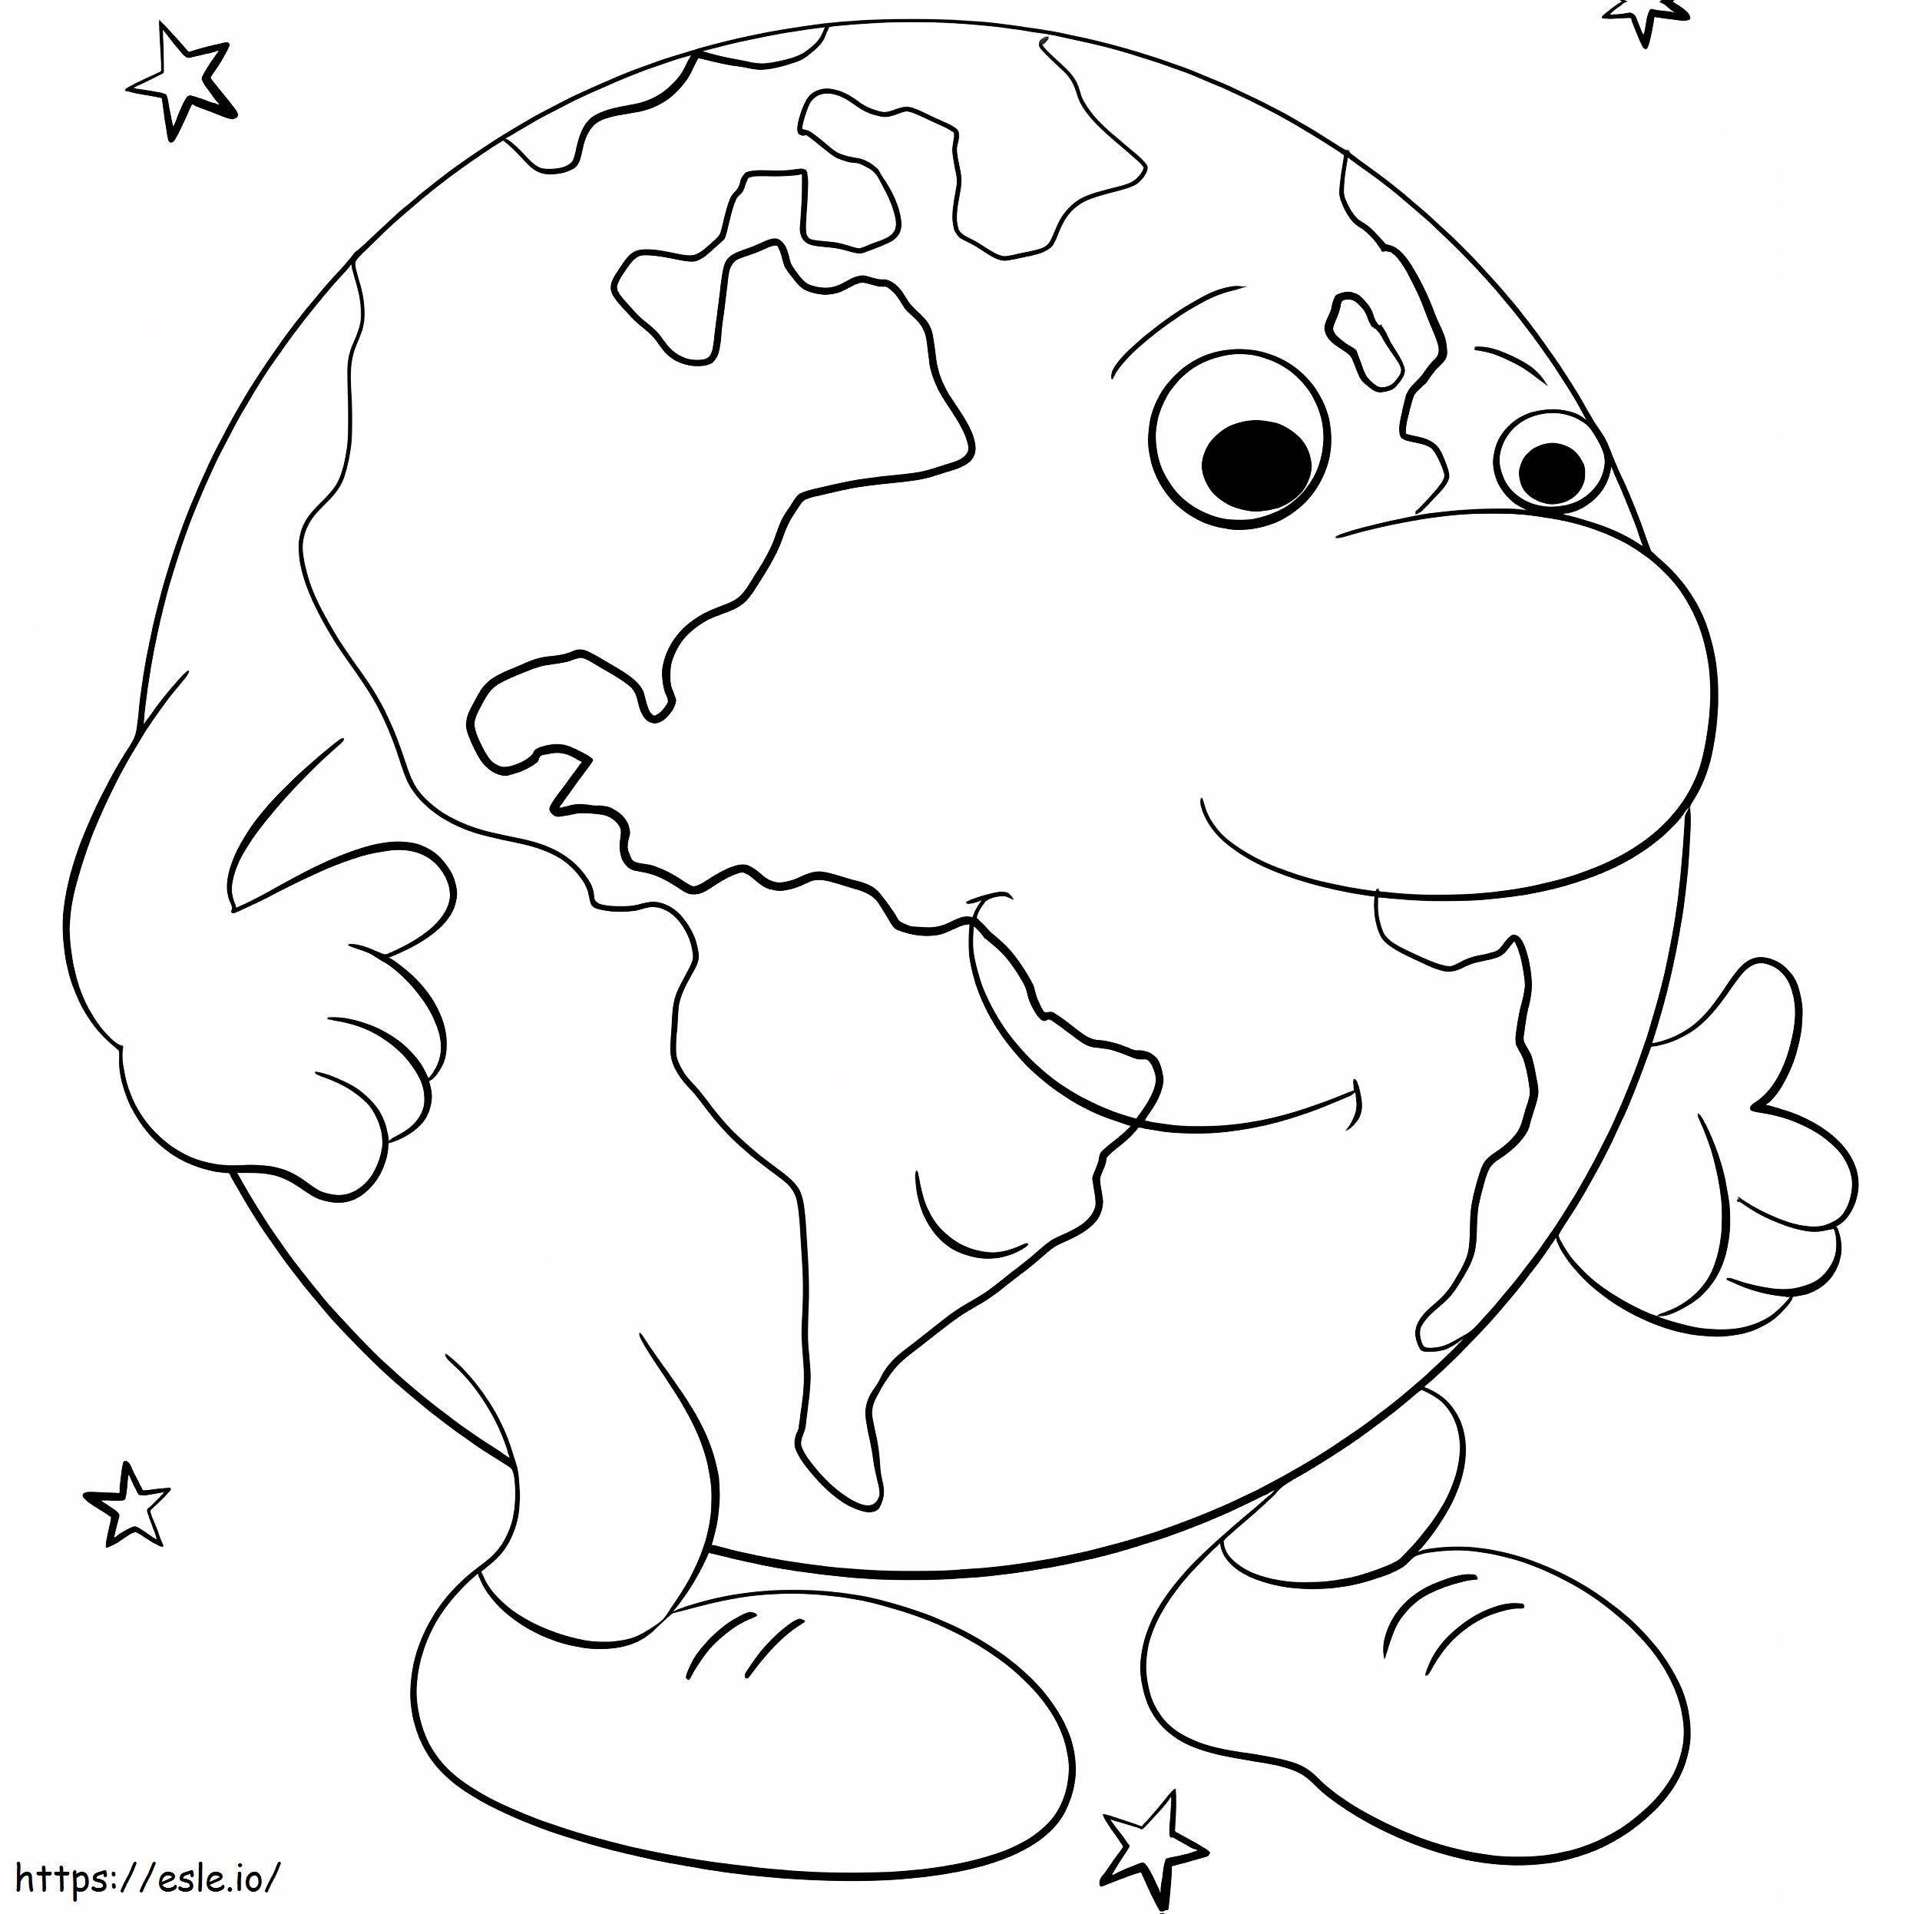 Earth Smiling coloring page